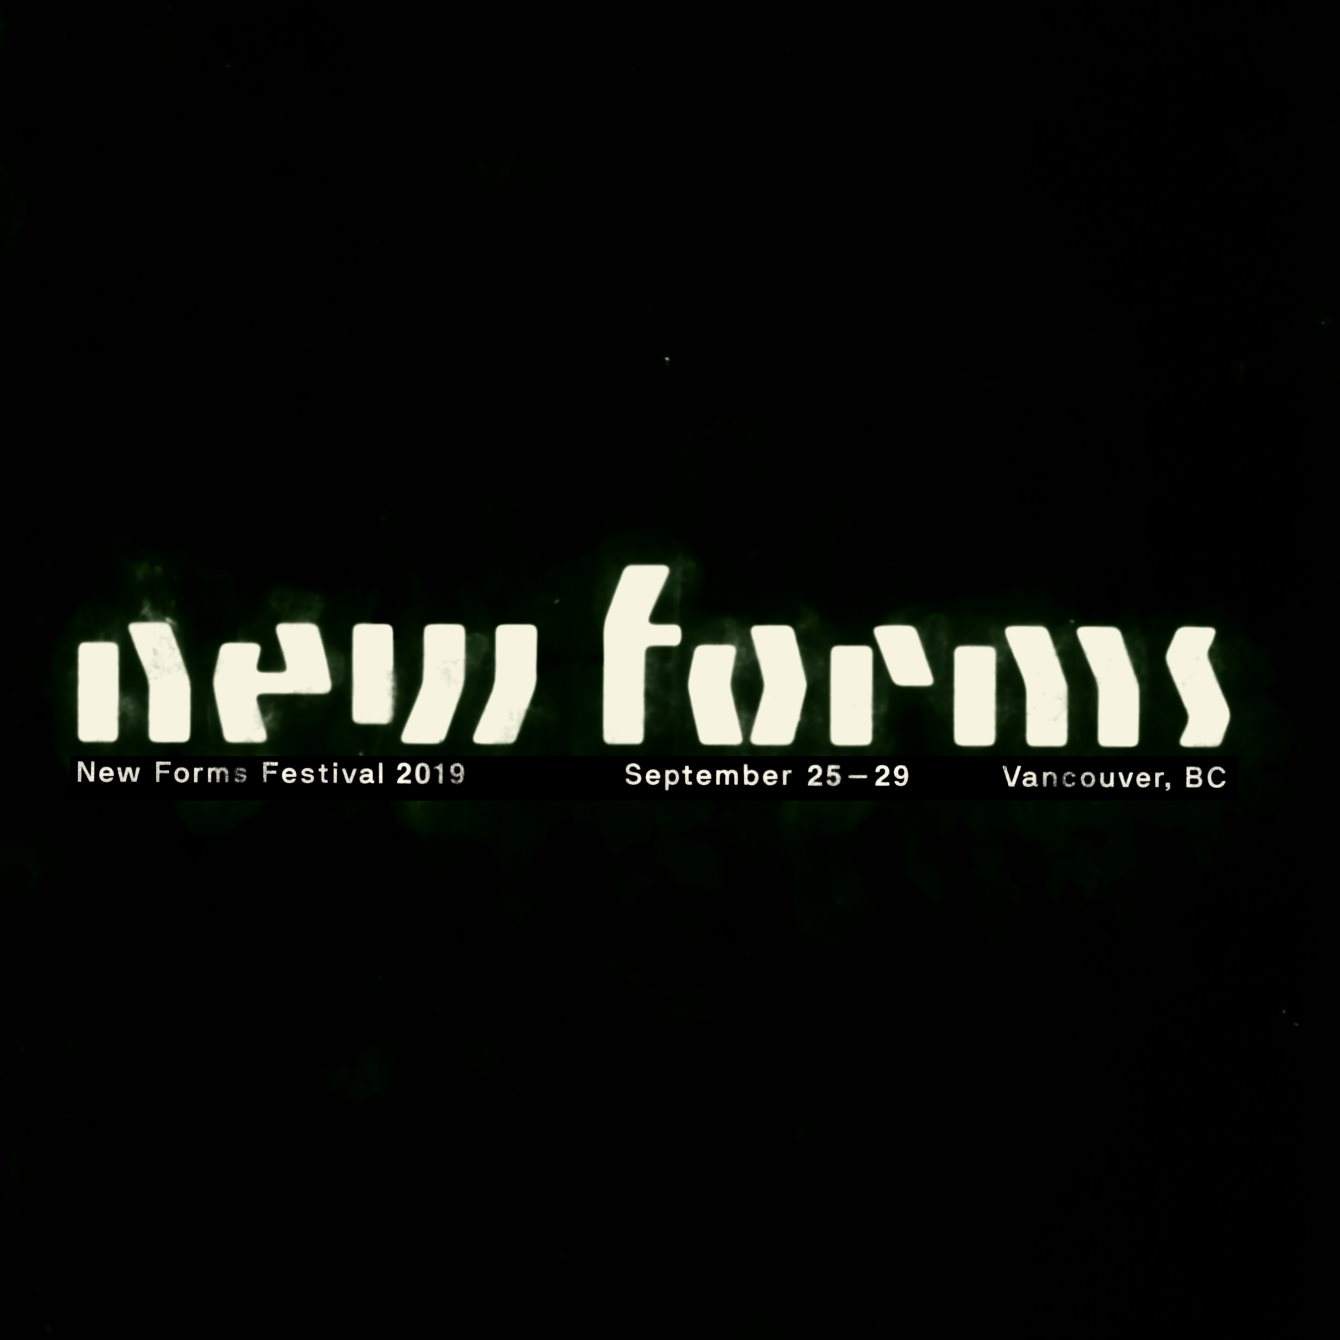 New Forms Festival 2019 - Flyer front